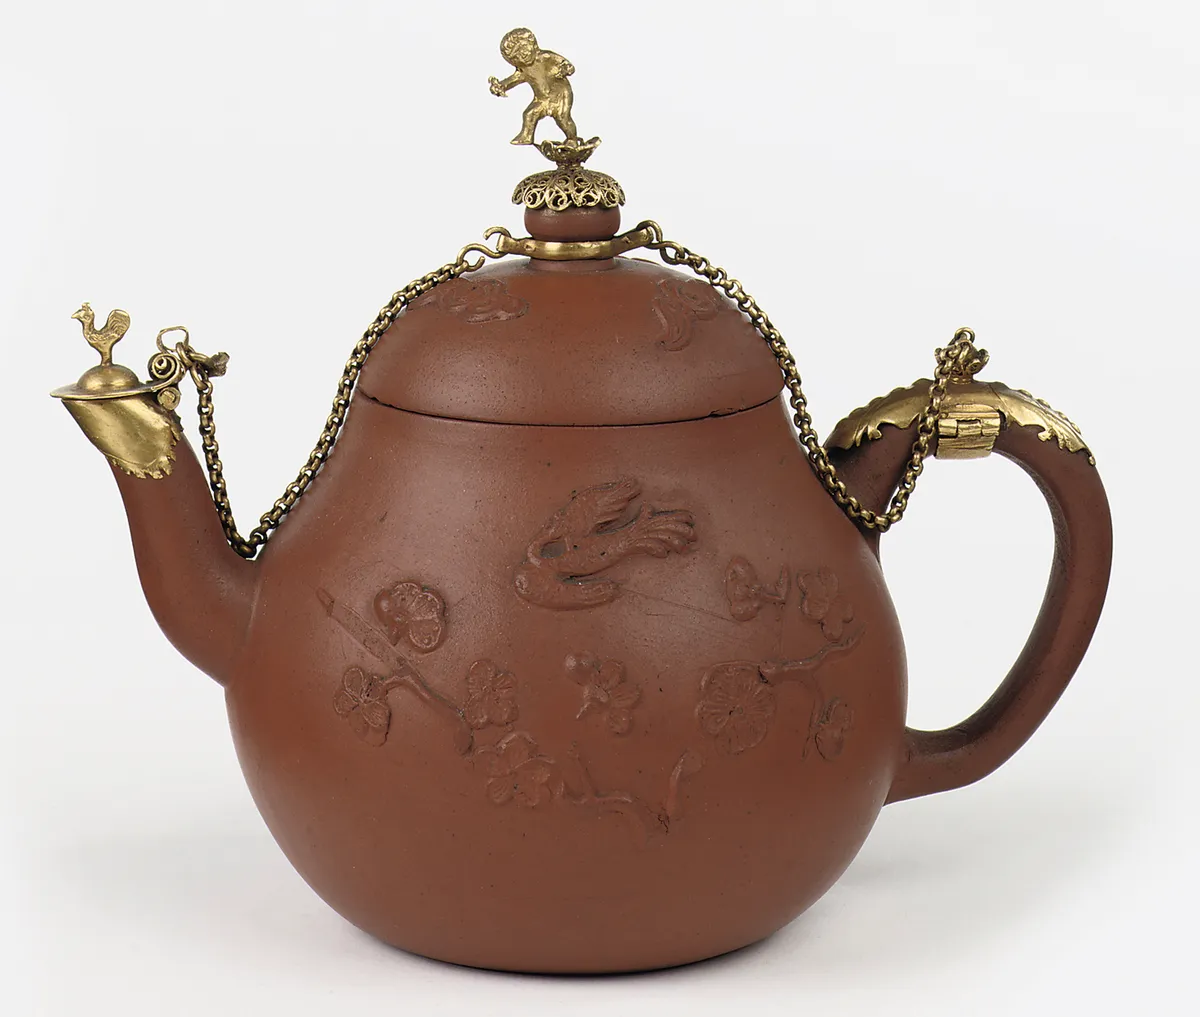 Collectible Teapots Complete Guide